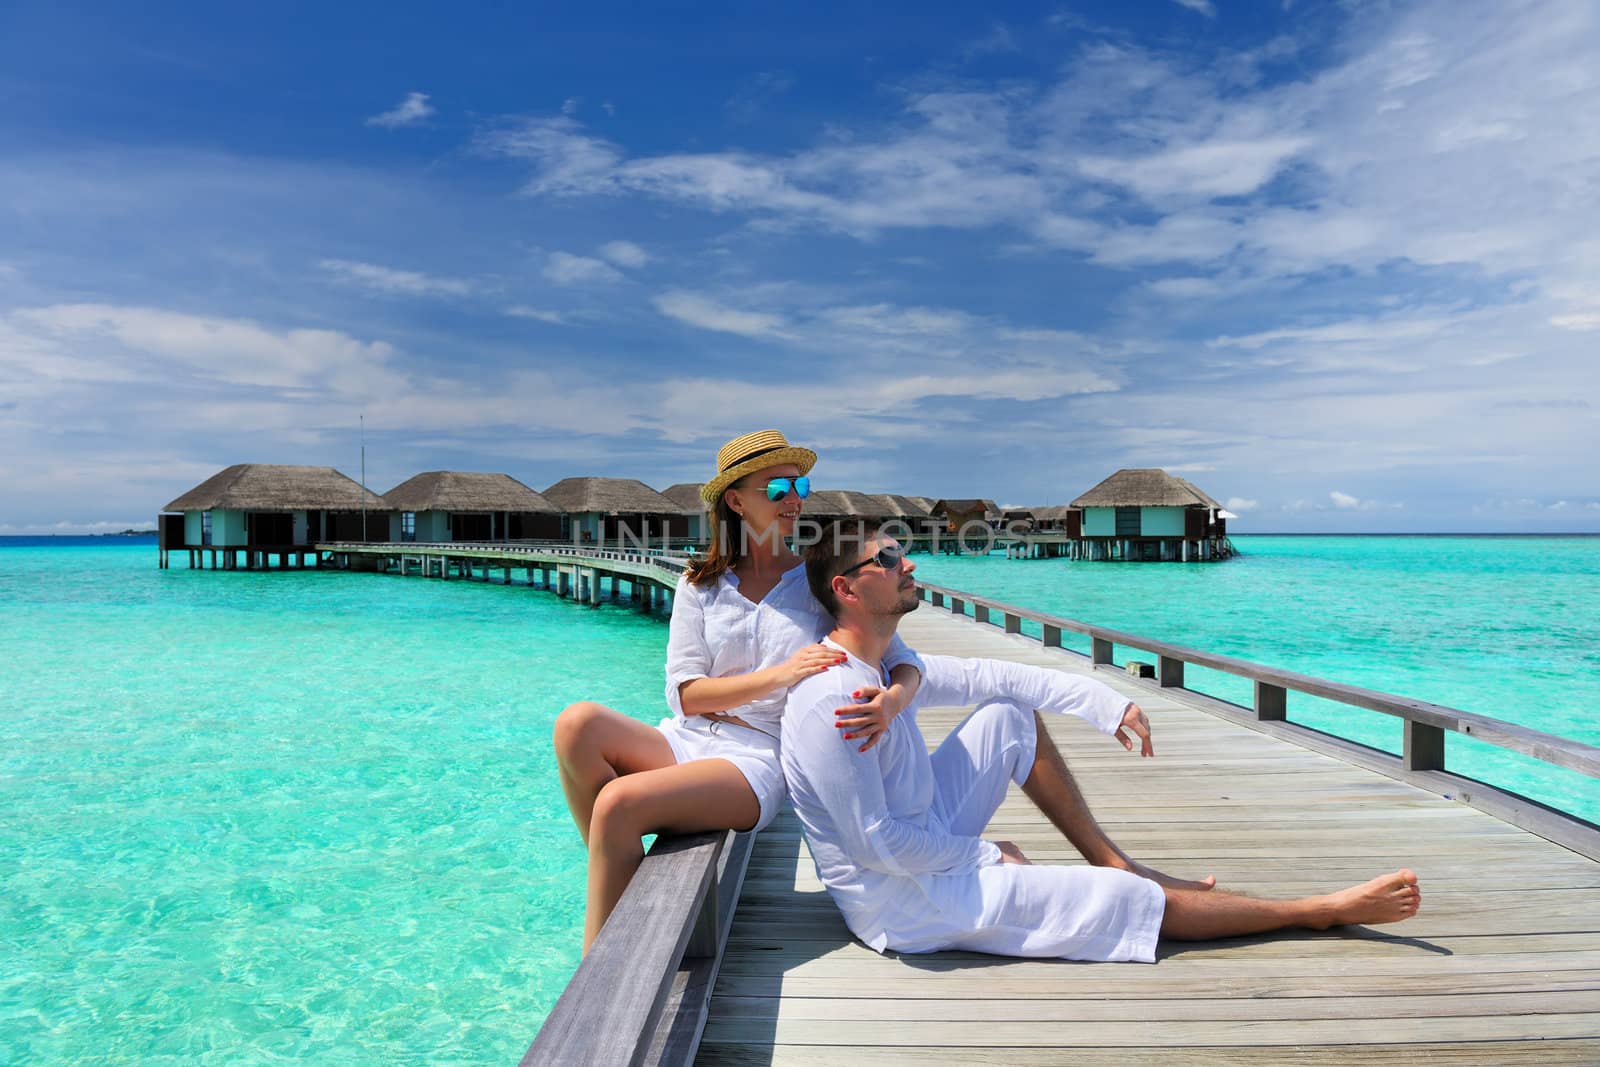 Couple on a tropical beach jetty at Maldives